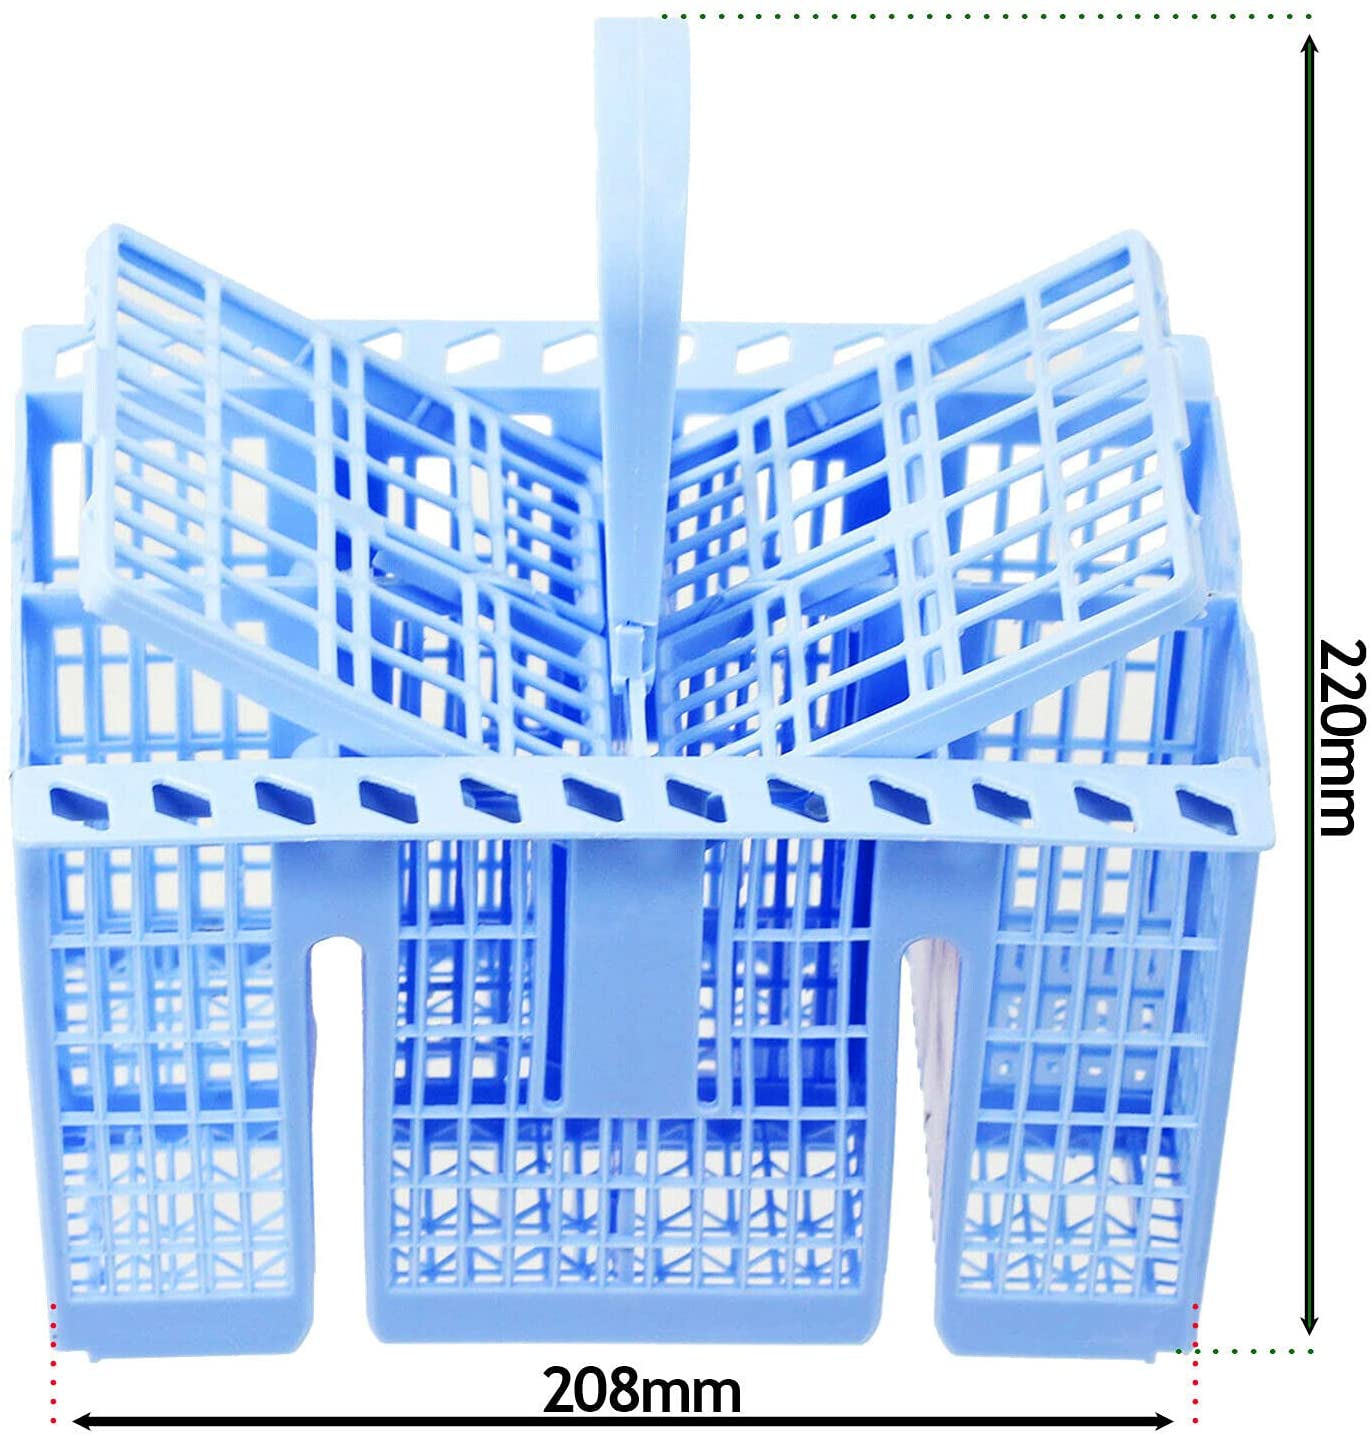 SPARES2GO Cutlery Basket compatible with Proline Dishwasher (Blue, 220 x 208 x 160mm)